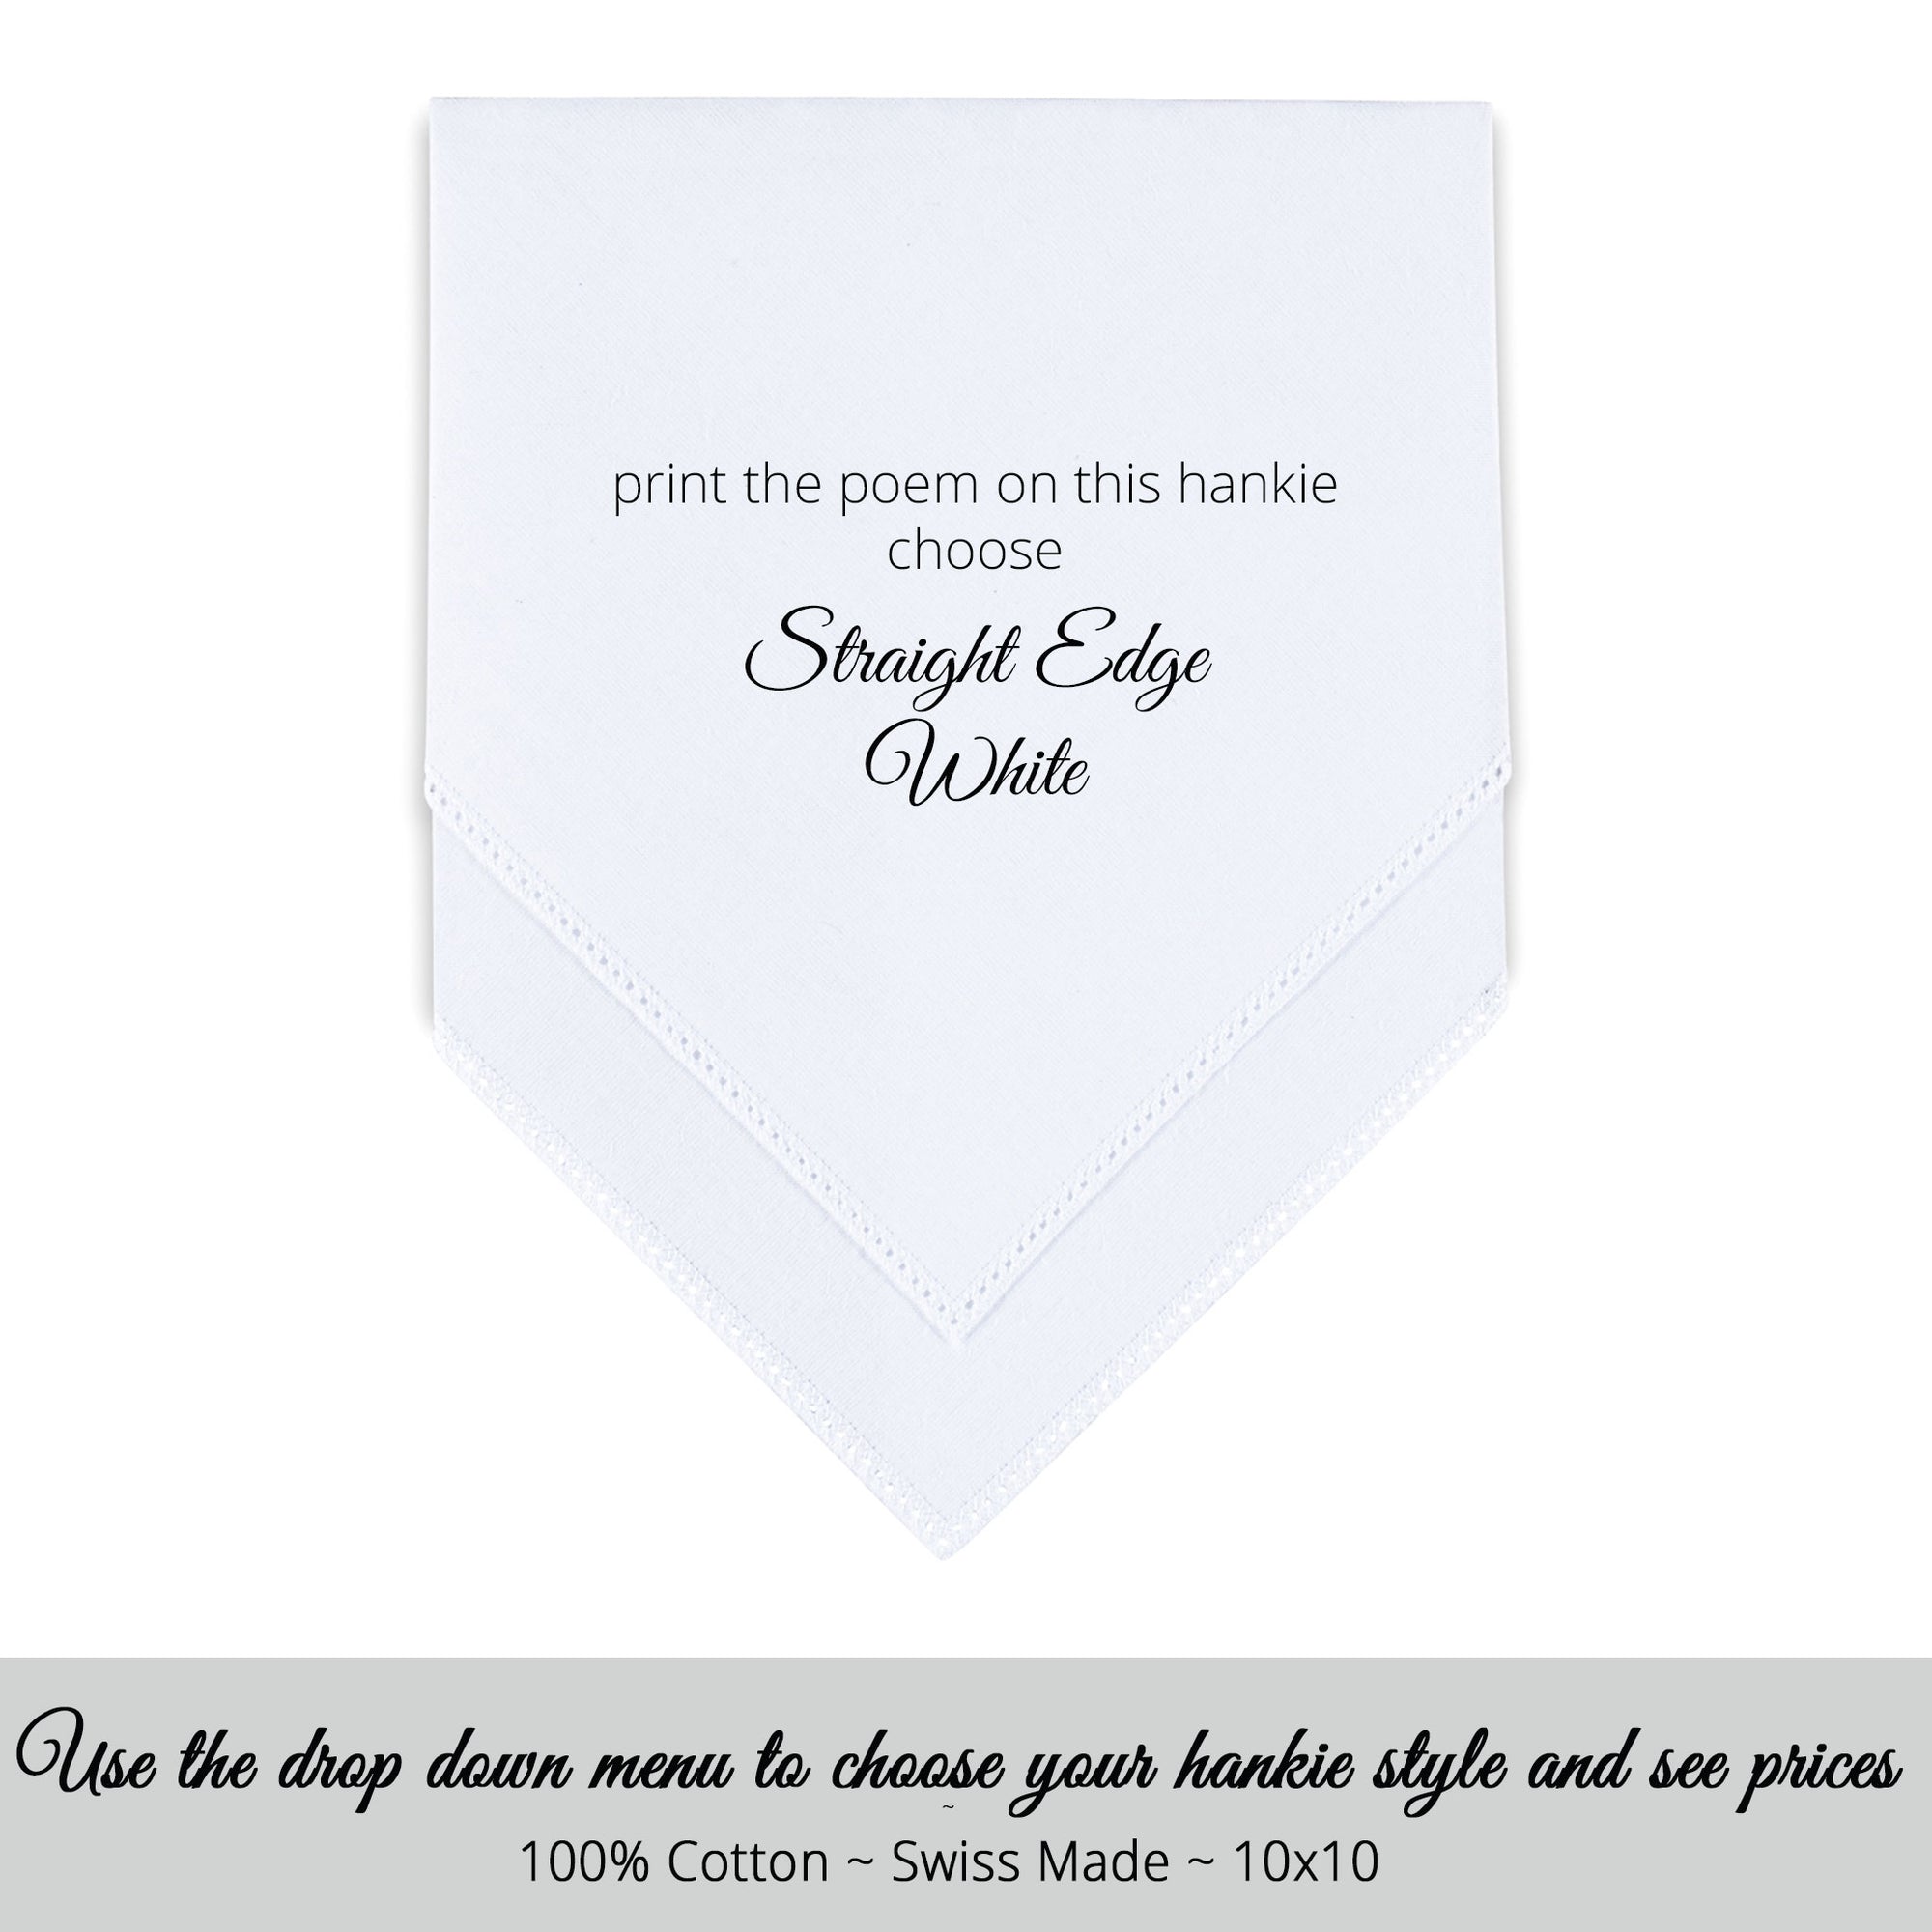 Straight edge white personalized wedding handkerchief for the stepmother of the groom